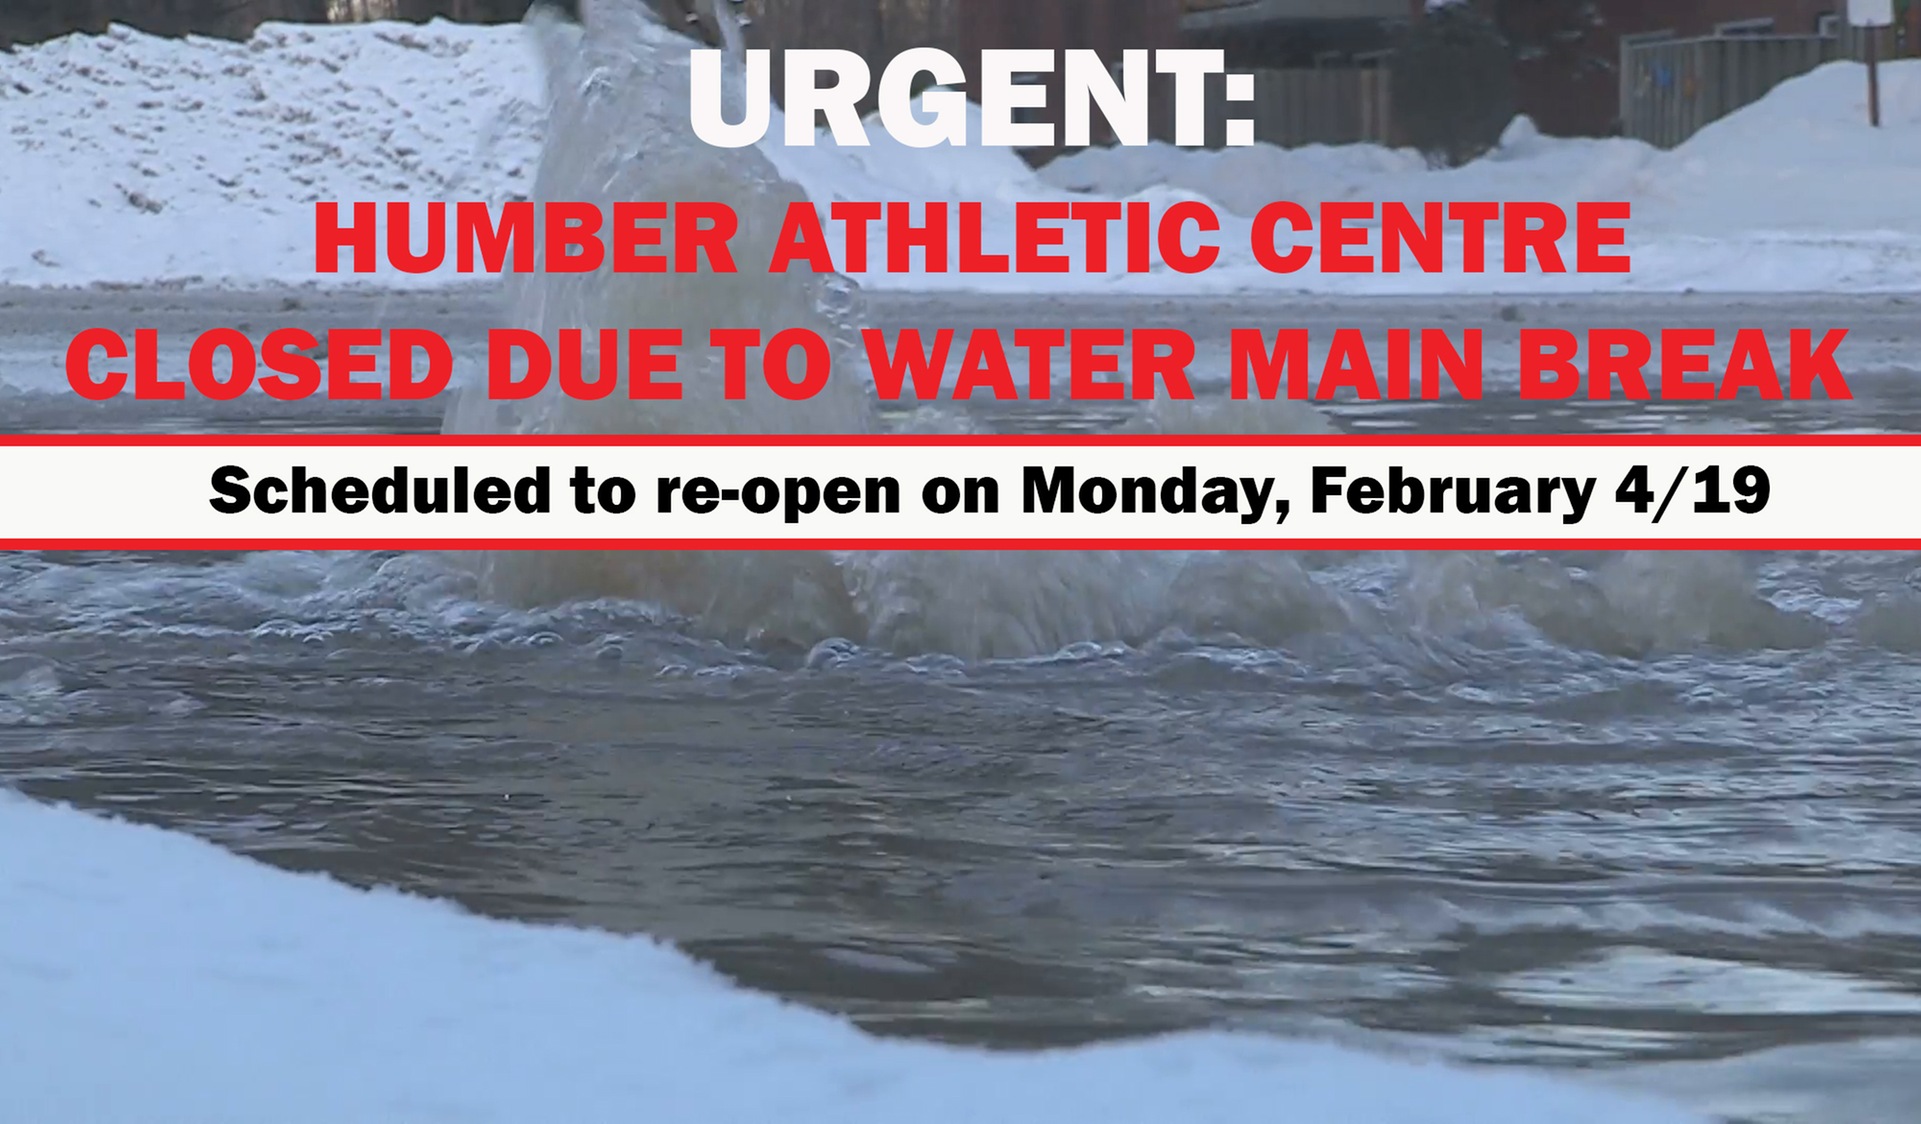 NORTH CAMPUS AND ATHLETIC FACILITIES CLOSED DUE TO WATER MAIN BREAK